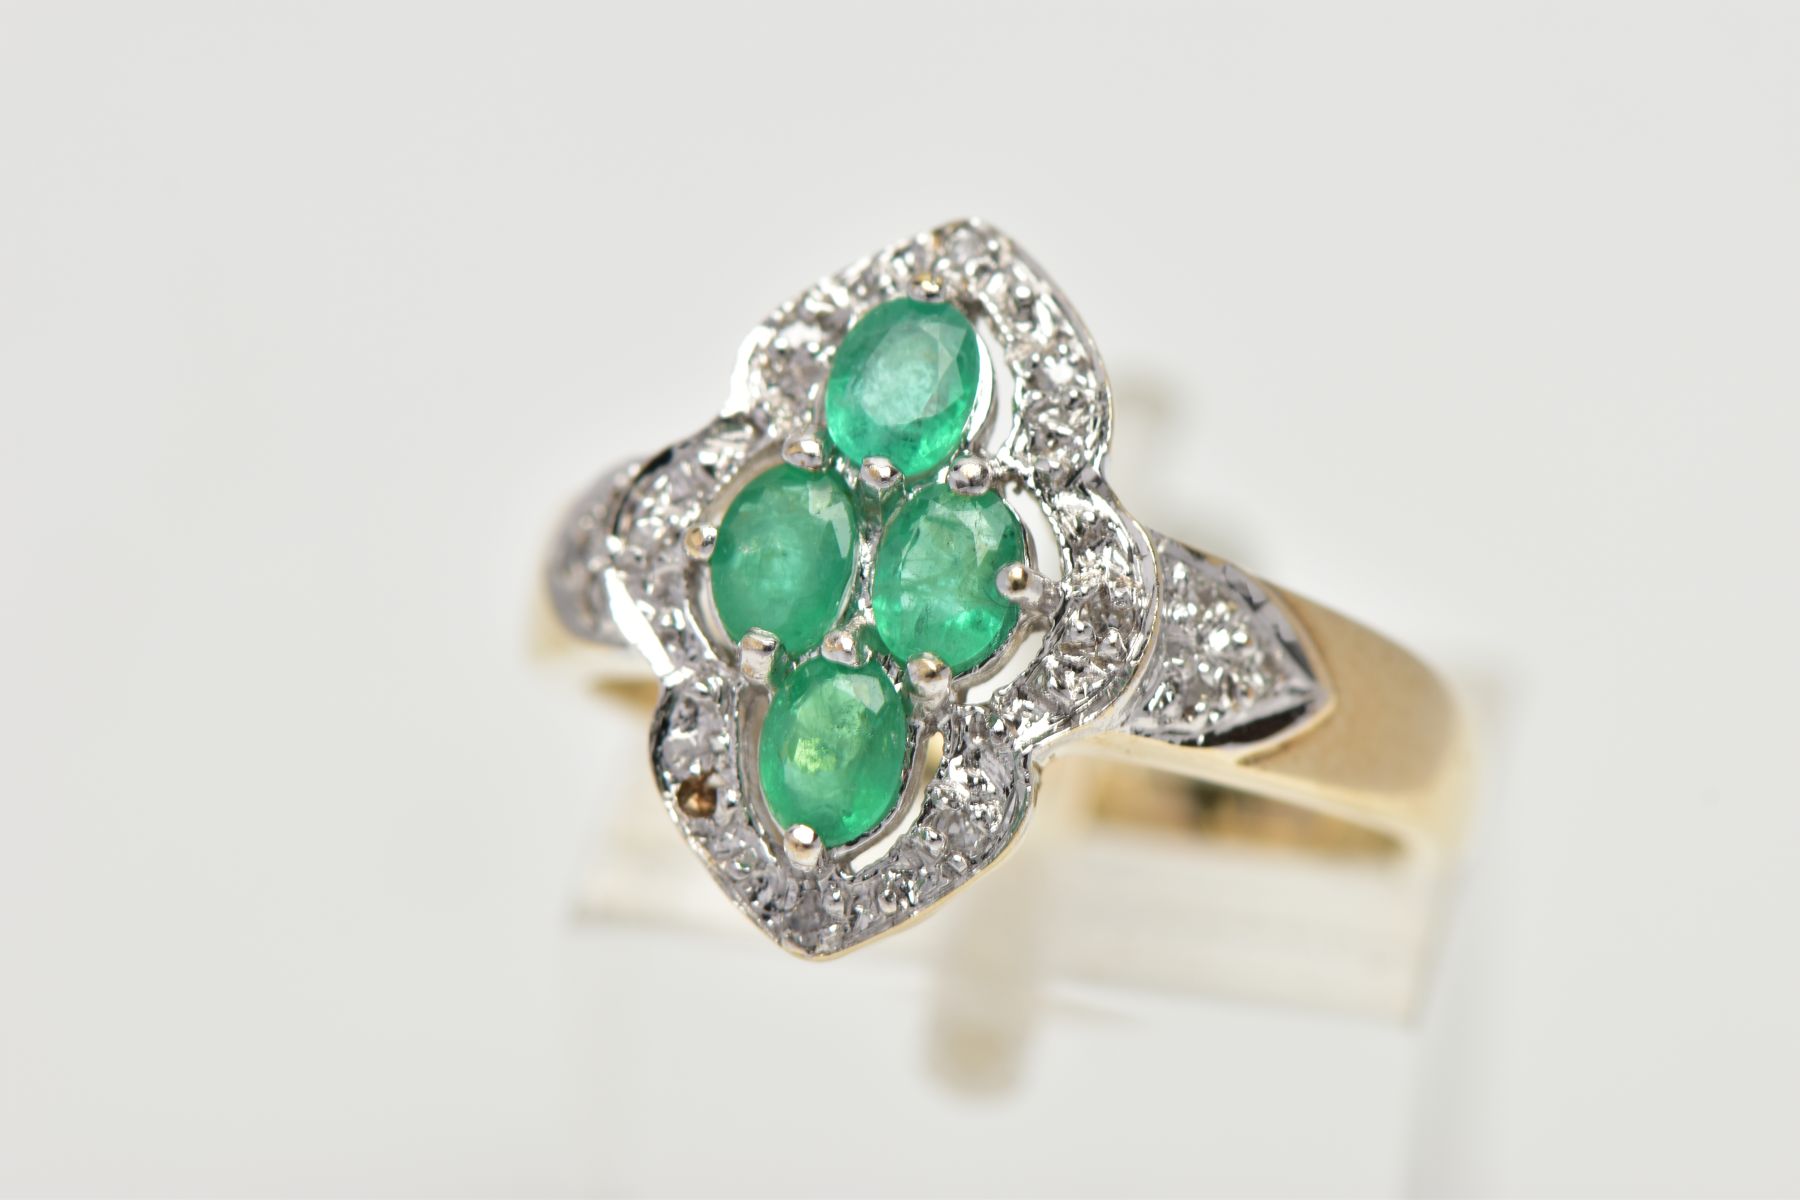 A 9CT YELLOW AND WHITE GOLD EMERALD AND DIAMOND DRESS RING, set with four oval cut emeralds,